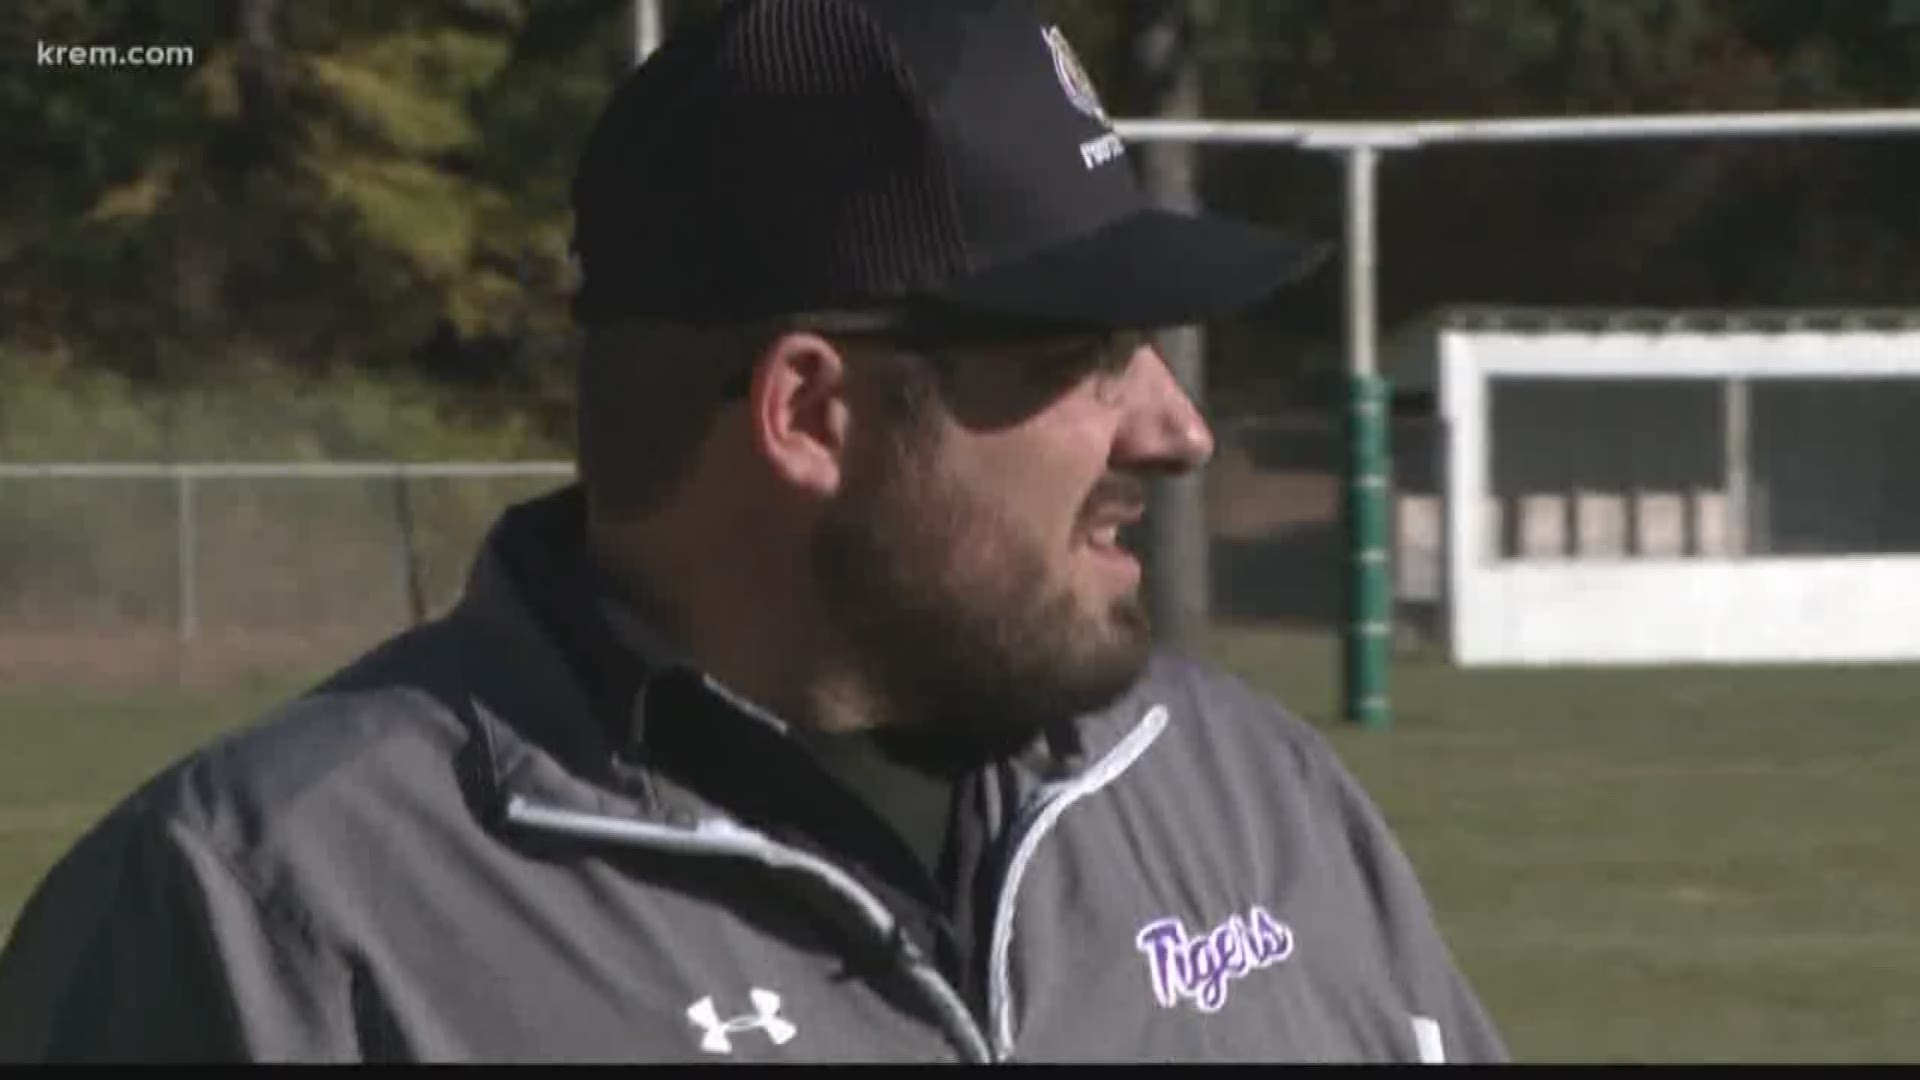 St. Regis head coach Stetson Spooner strapped on a mic for the Tigers' 48-12 win over Kootenai.